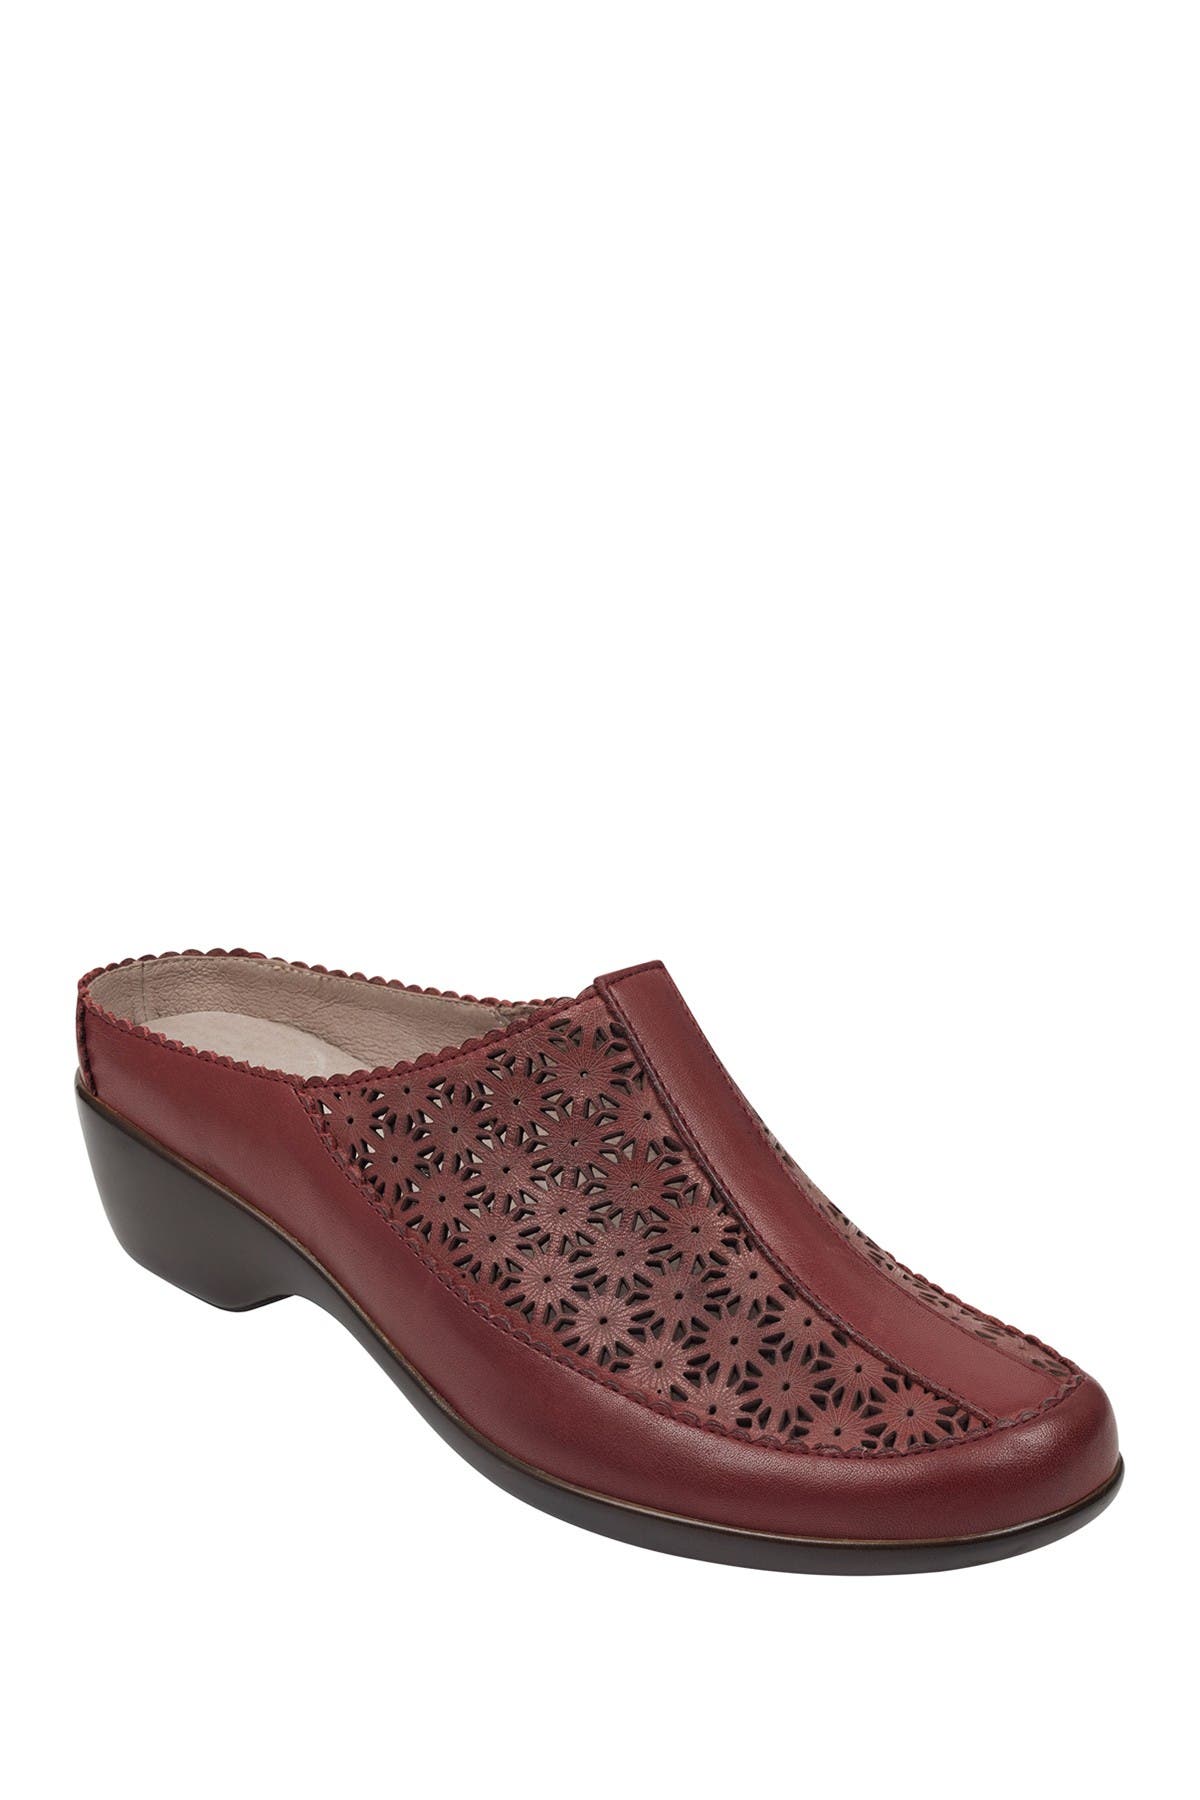 easy spirit wide width shoes